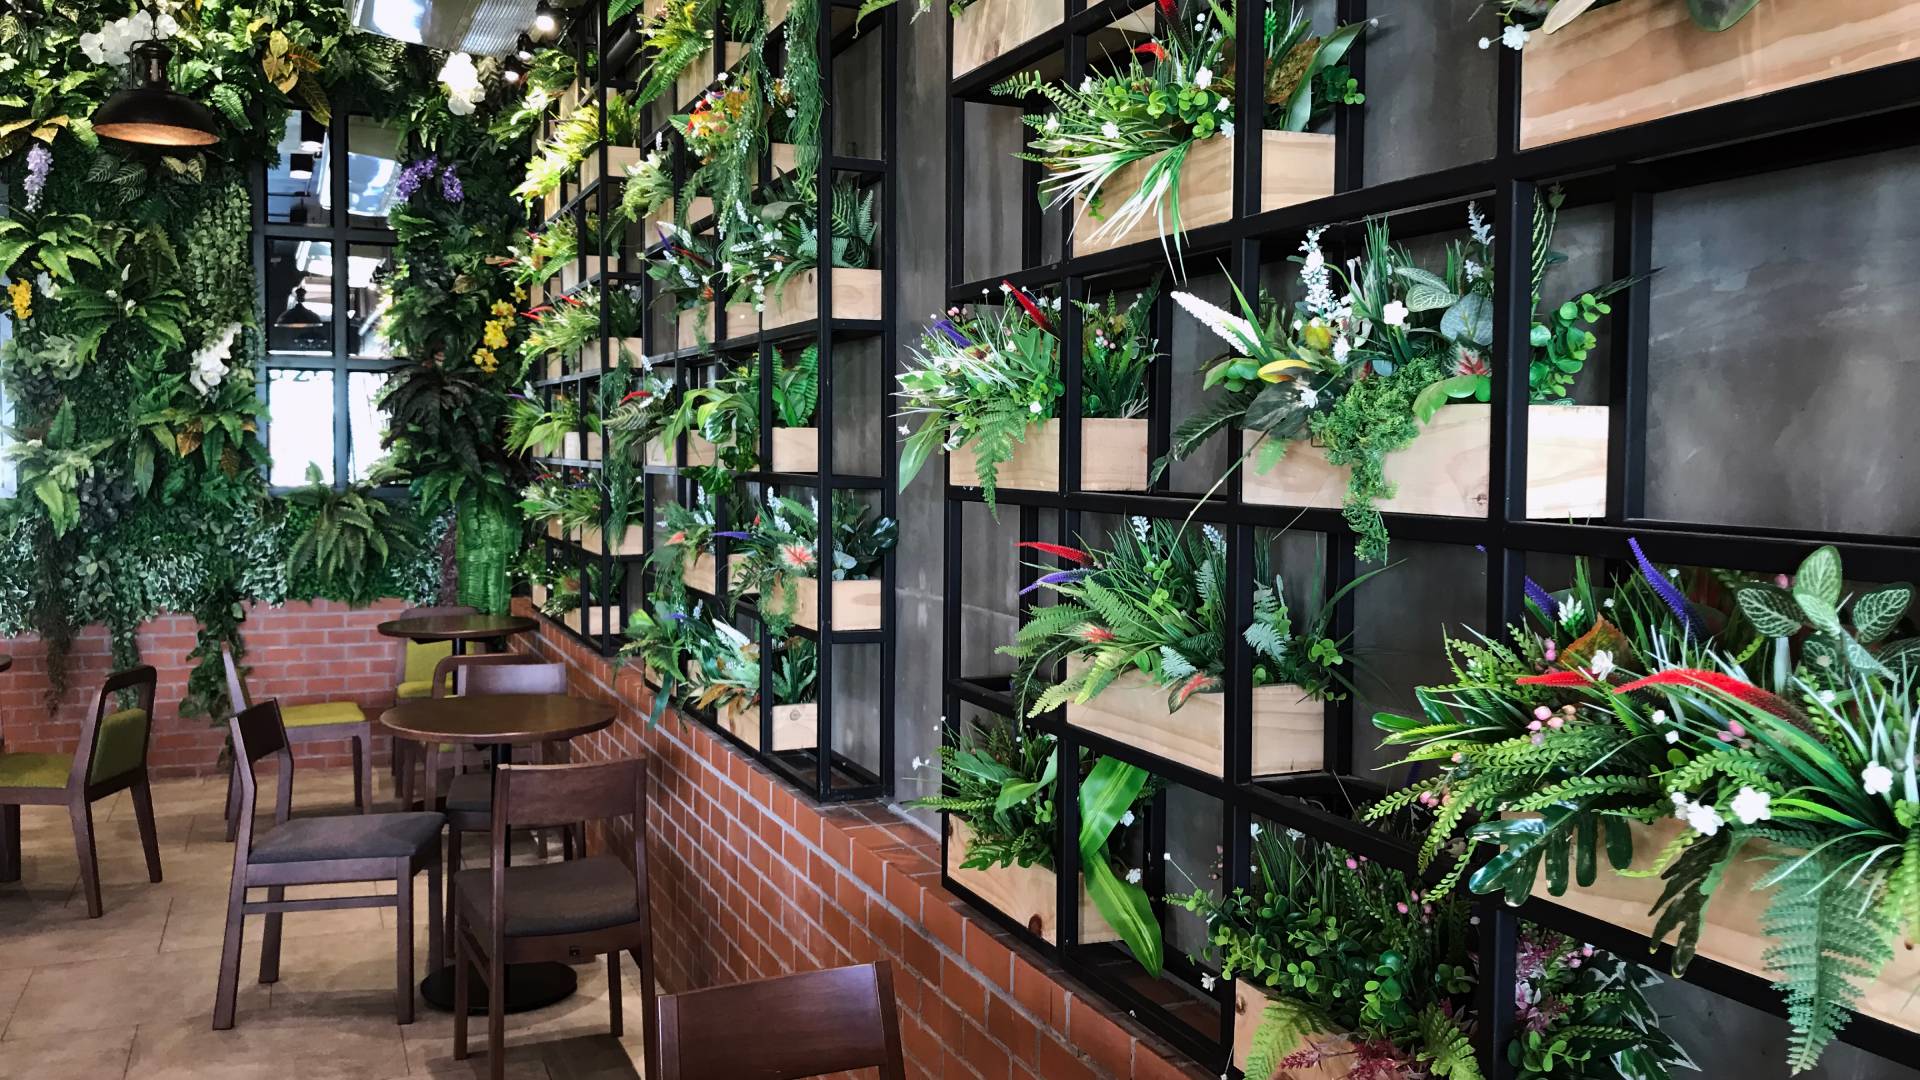 Restaurant with an artificial living wall